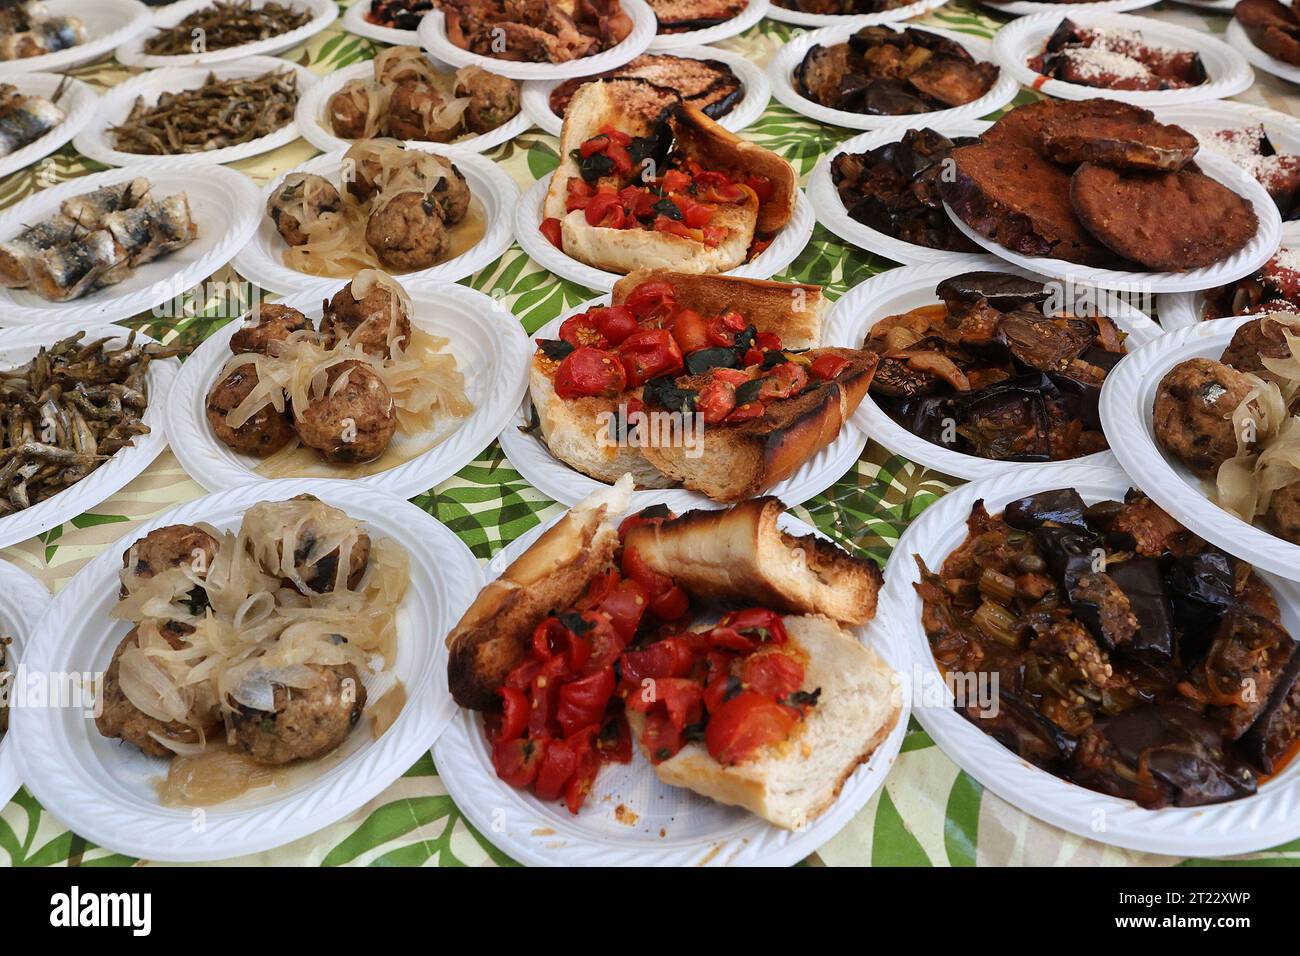 Street food on display at a cafe in the Ballaro Market, Palermo, Sicily Stock Photo